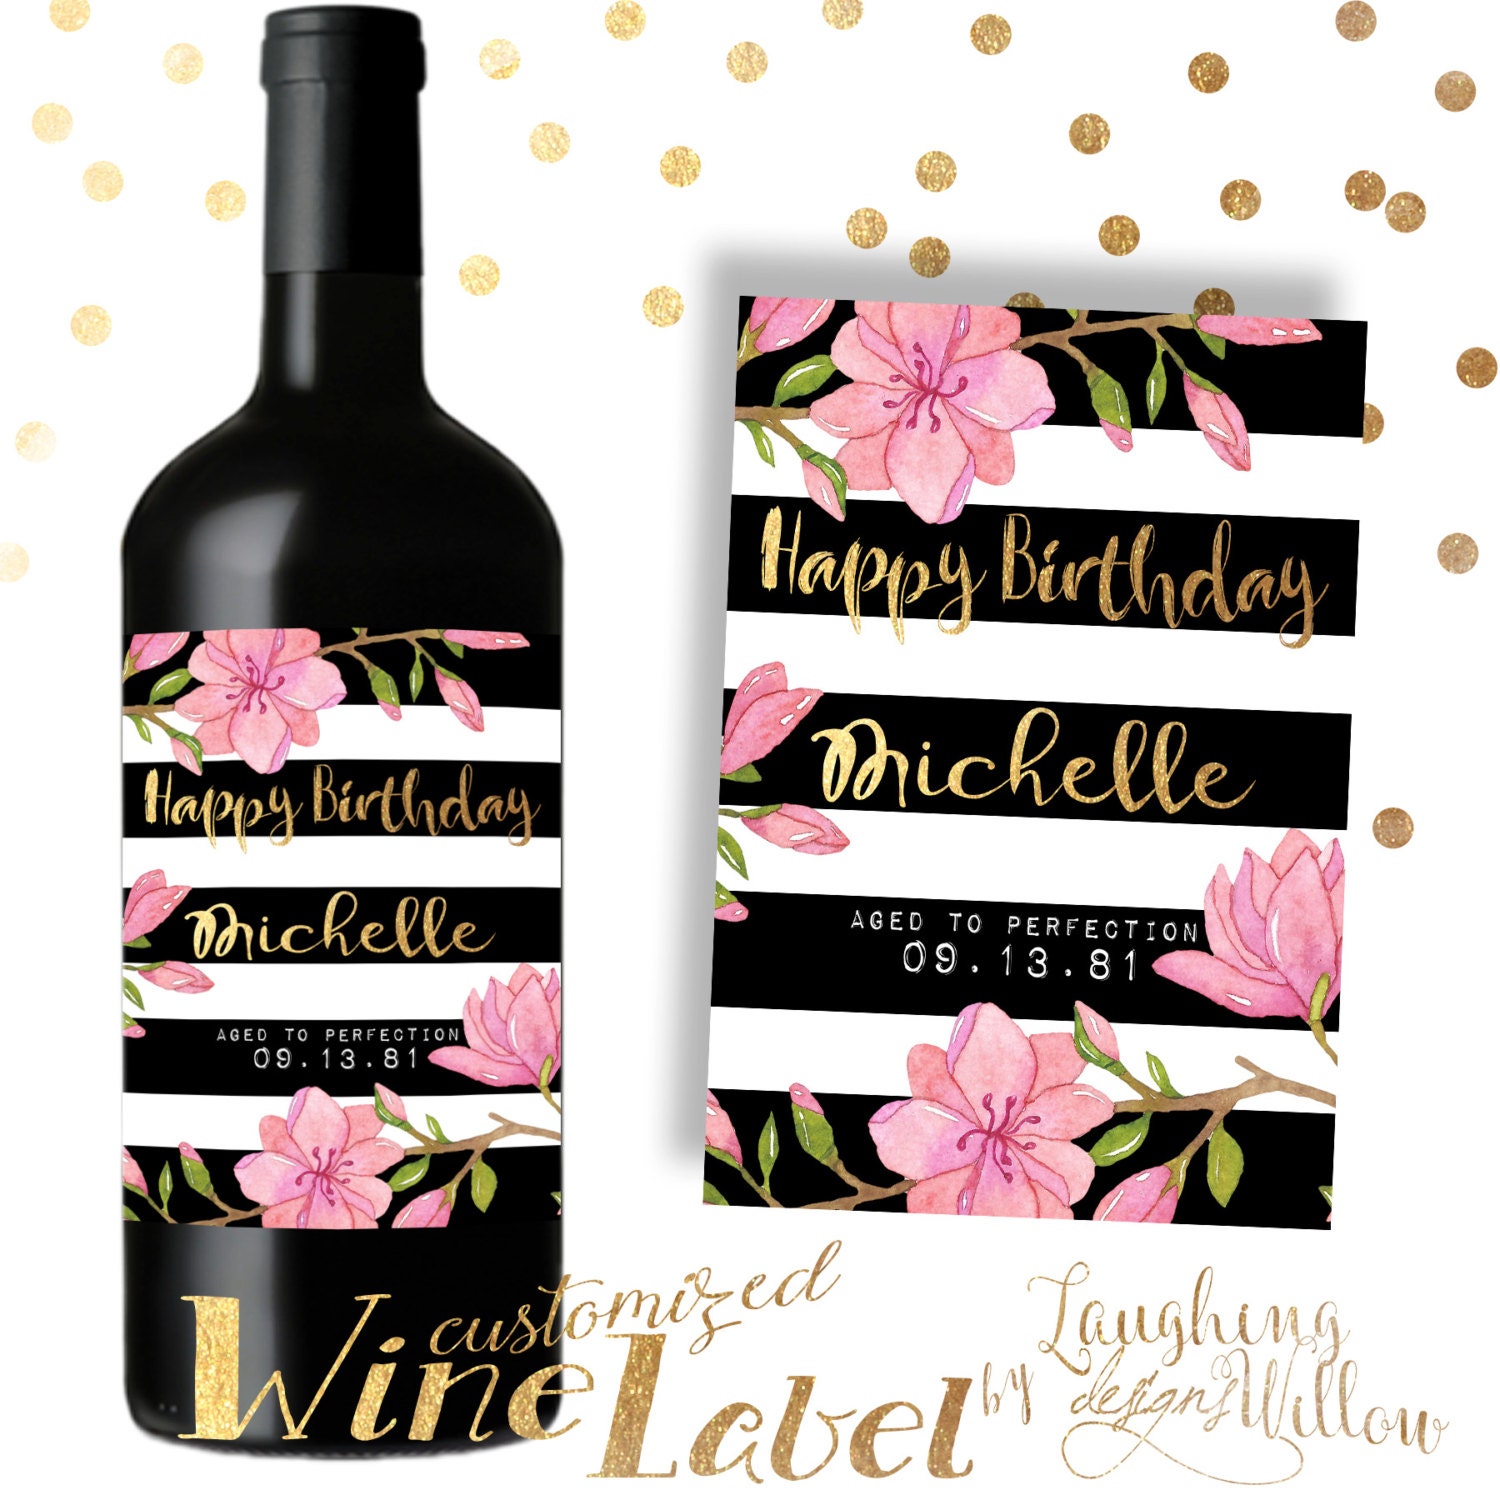 happy-birthday-wine-label-printable-by-laughingwillowdesign